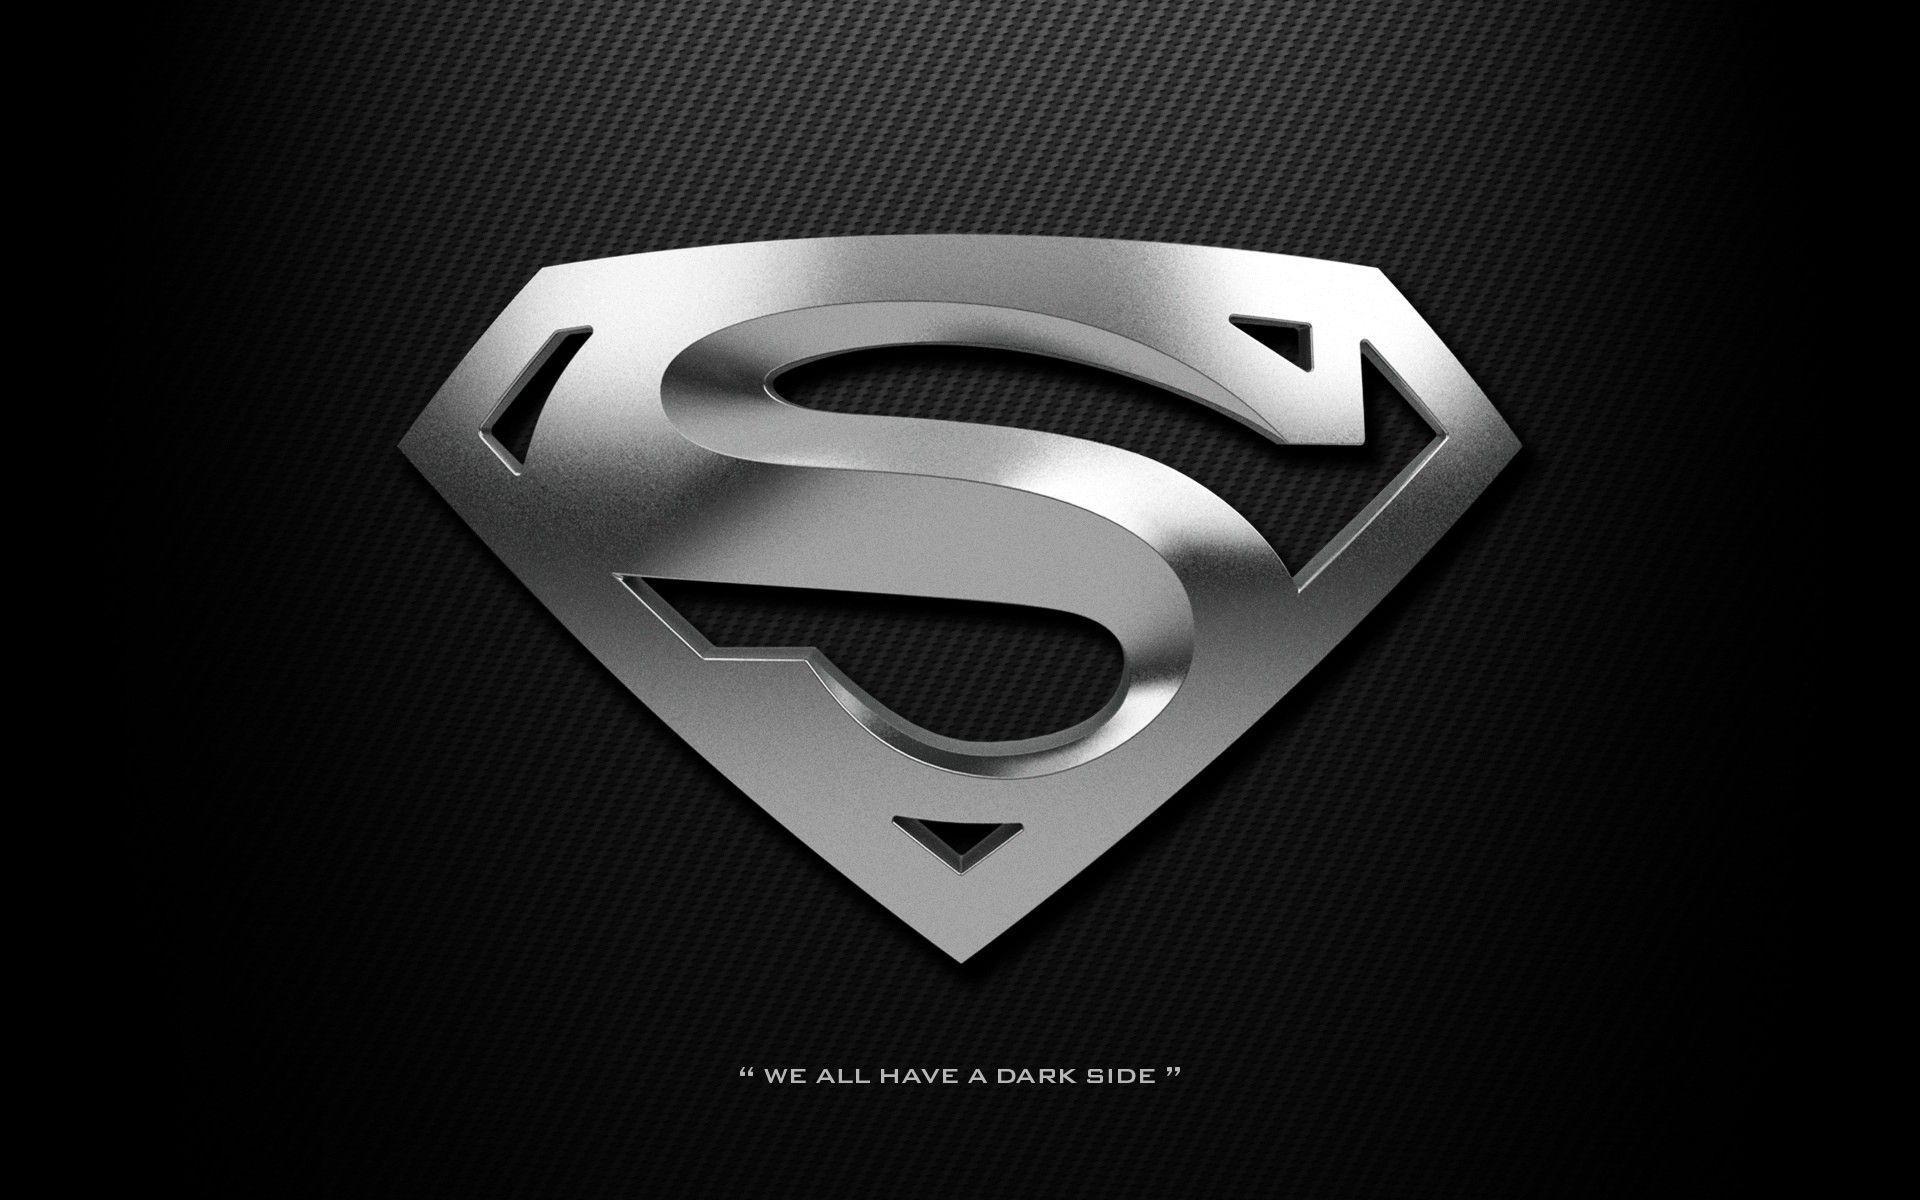 Red Black and White Superman Logo - New Superman Logo Wallpapers - Wallpaper Cave